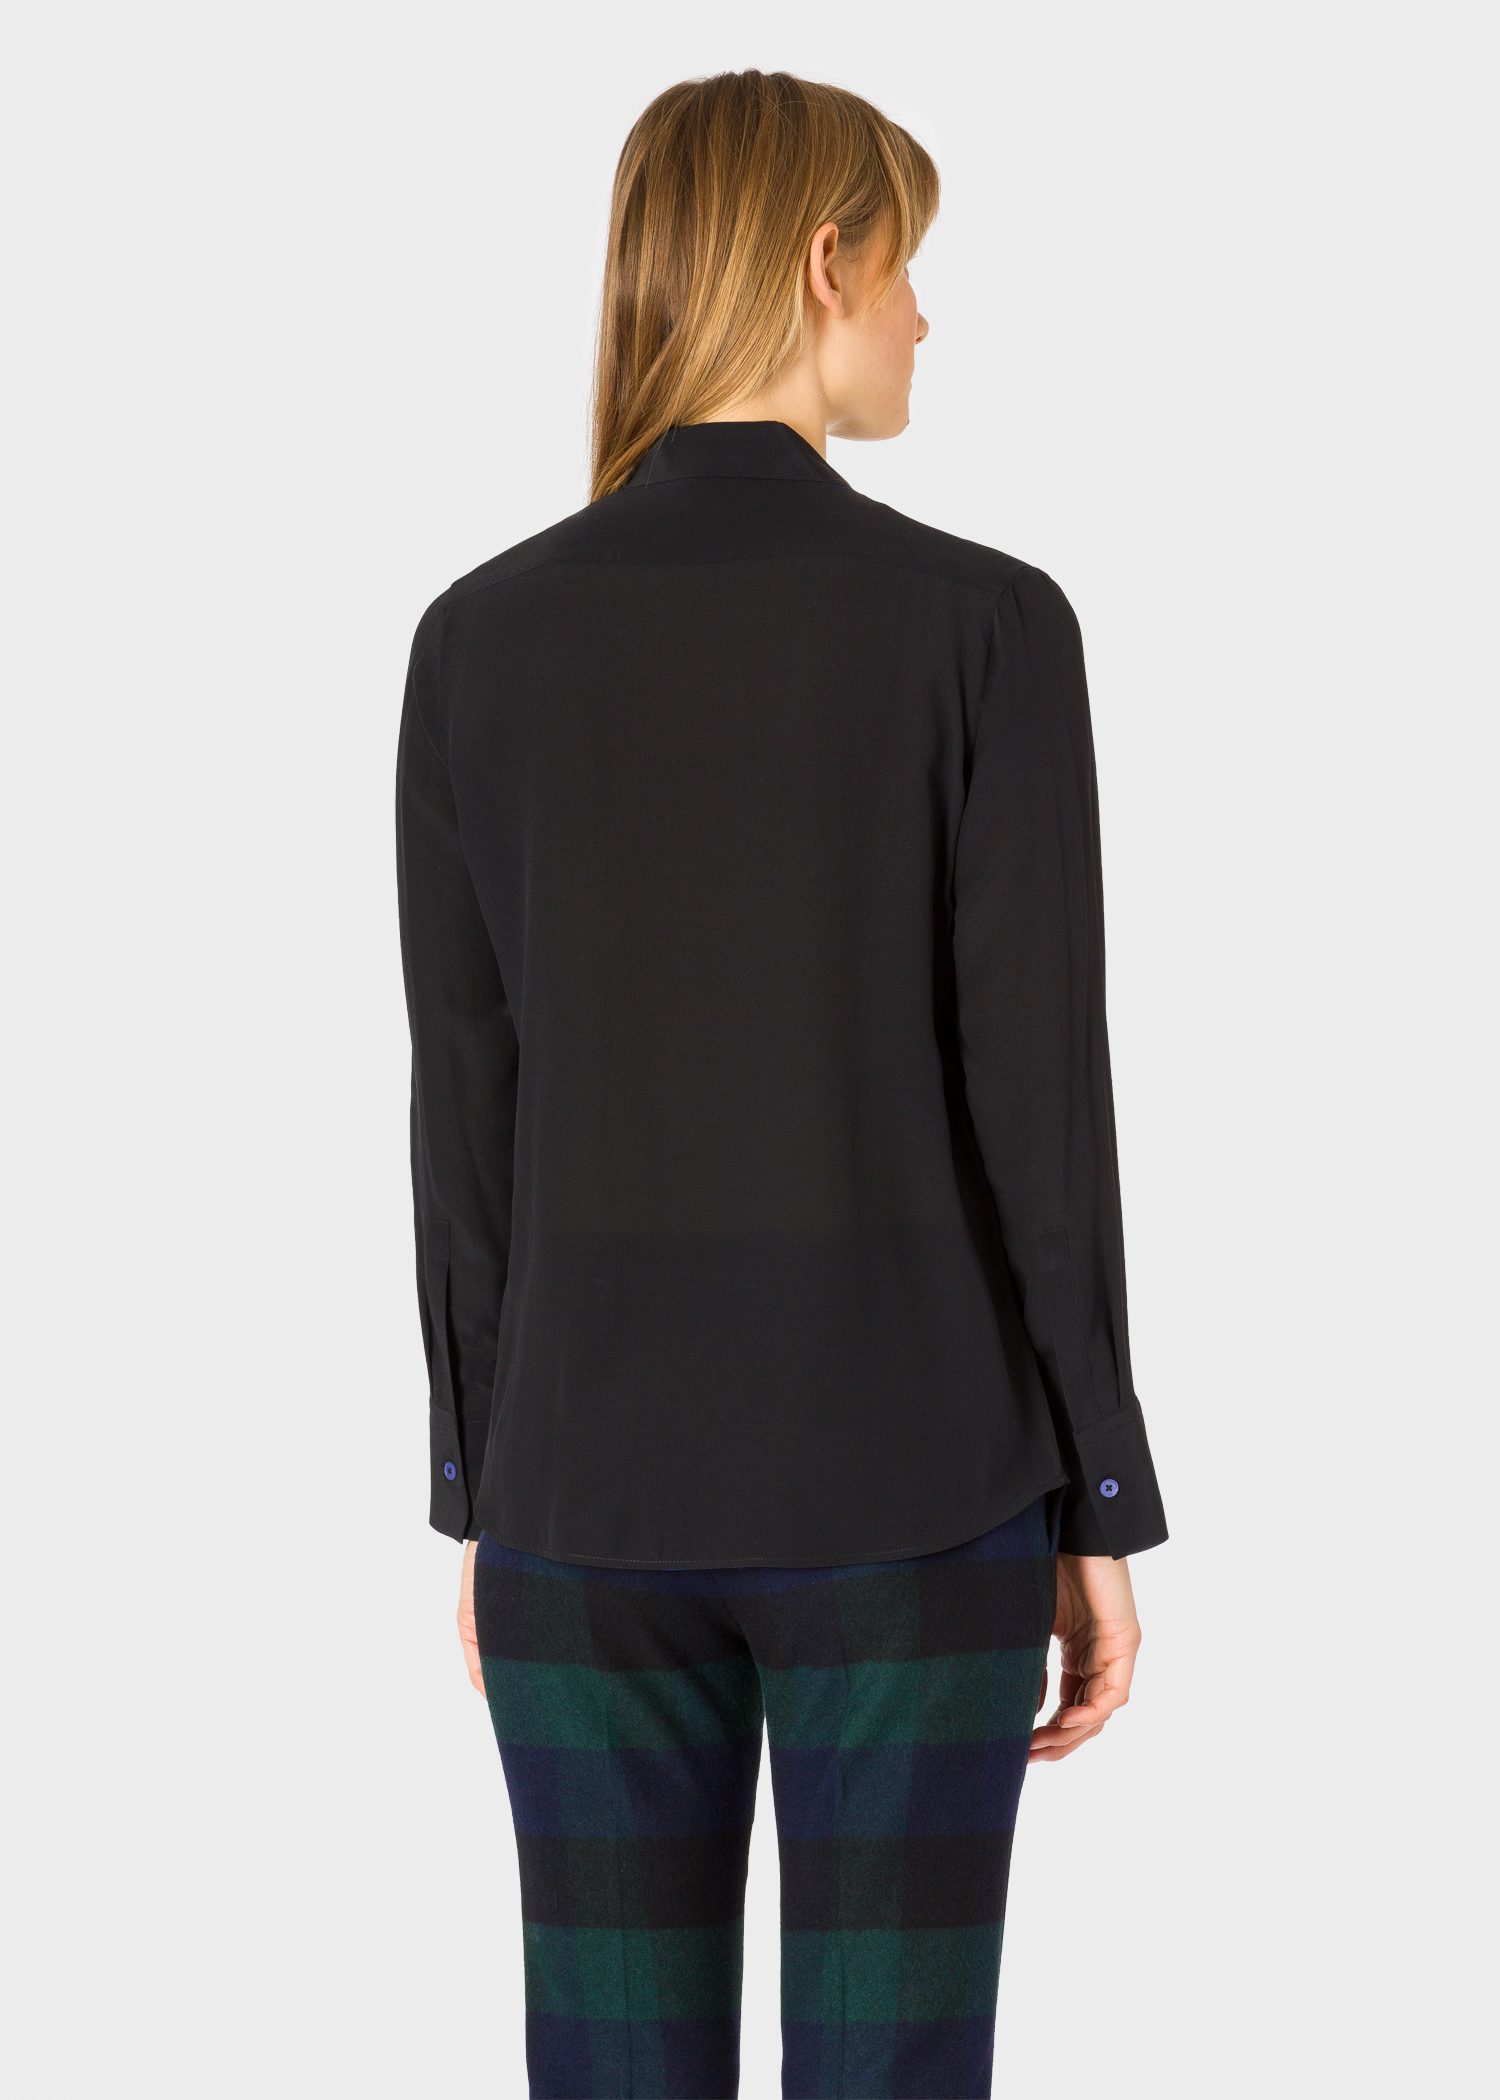 Model back close up - Women's Black Silk Shirt With Multi-Coloured Button Placket Paul Smith